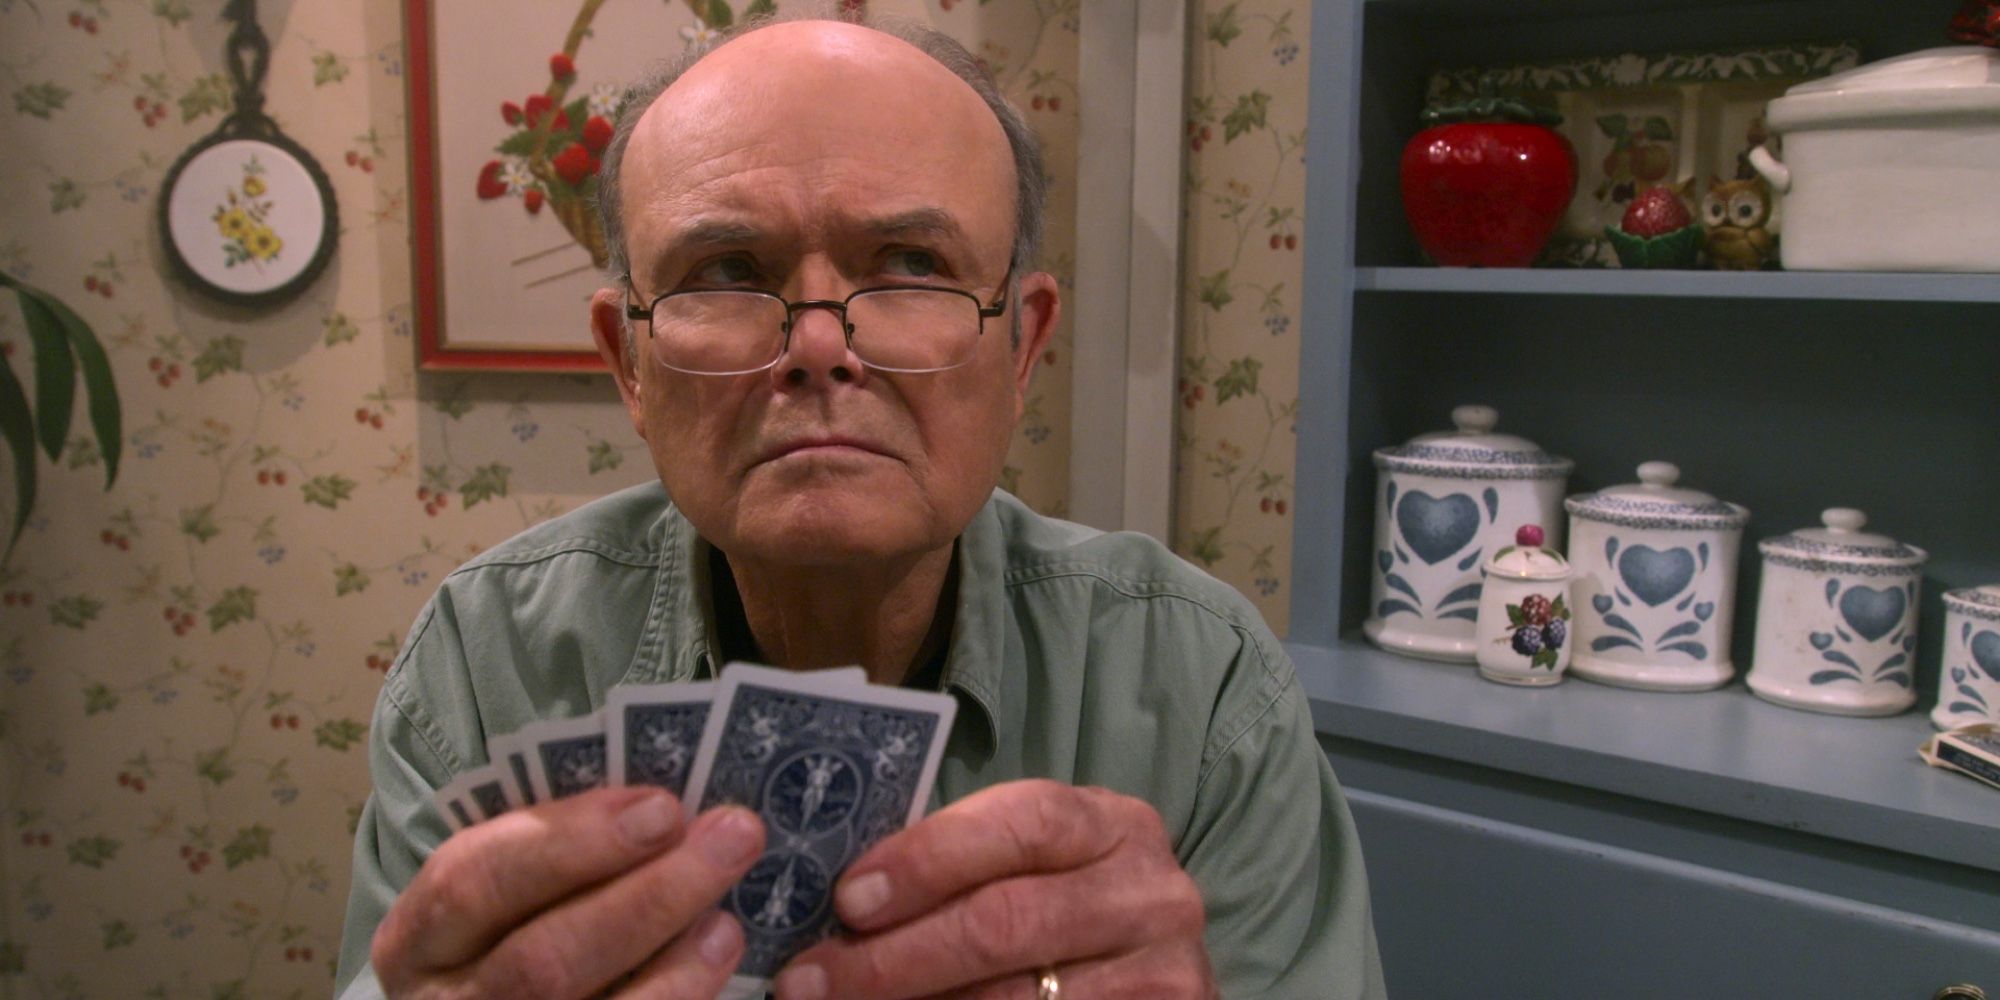 Red Forman in That 90s Show season 1 playing cards.